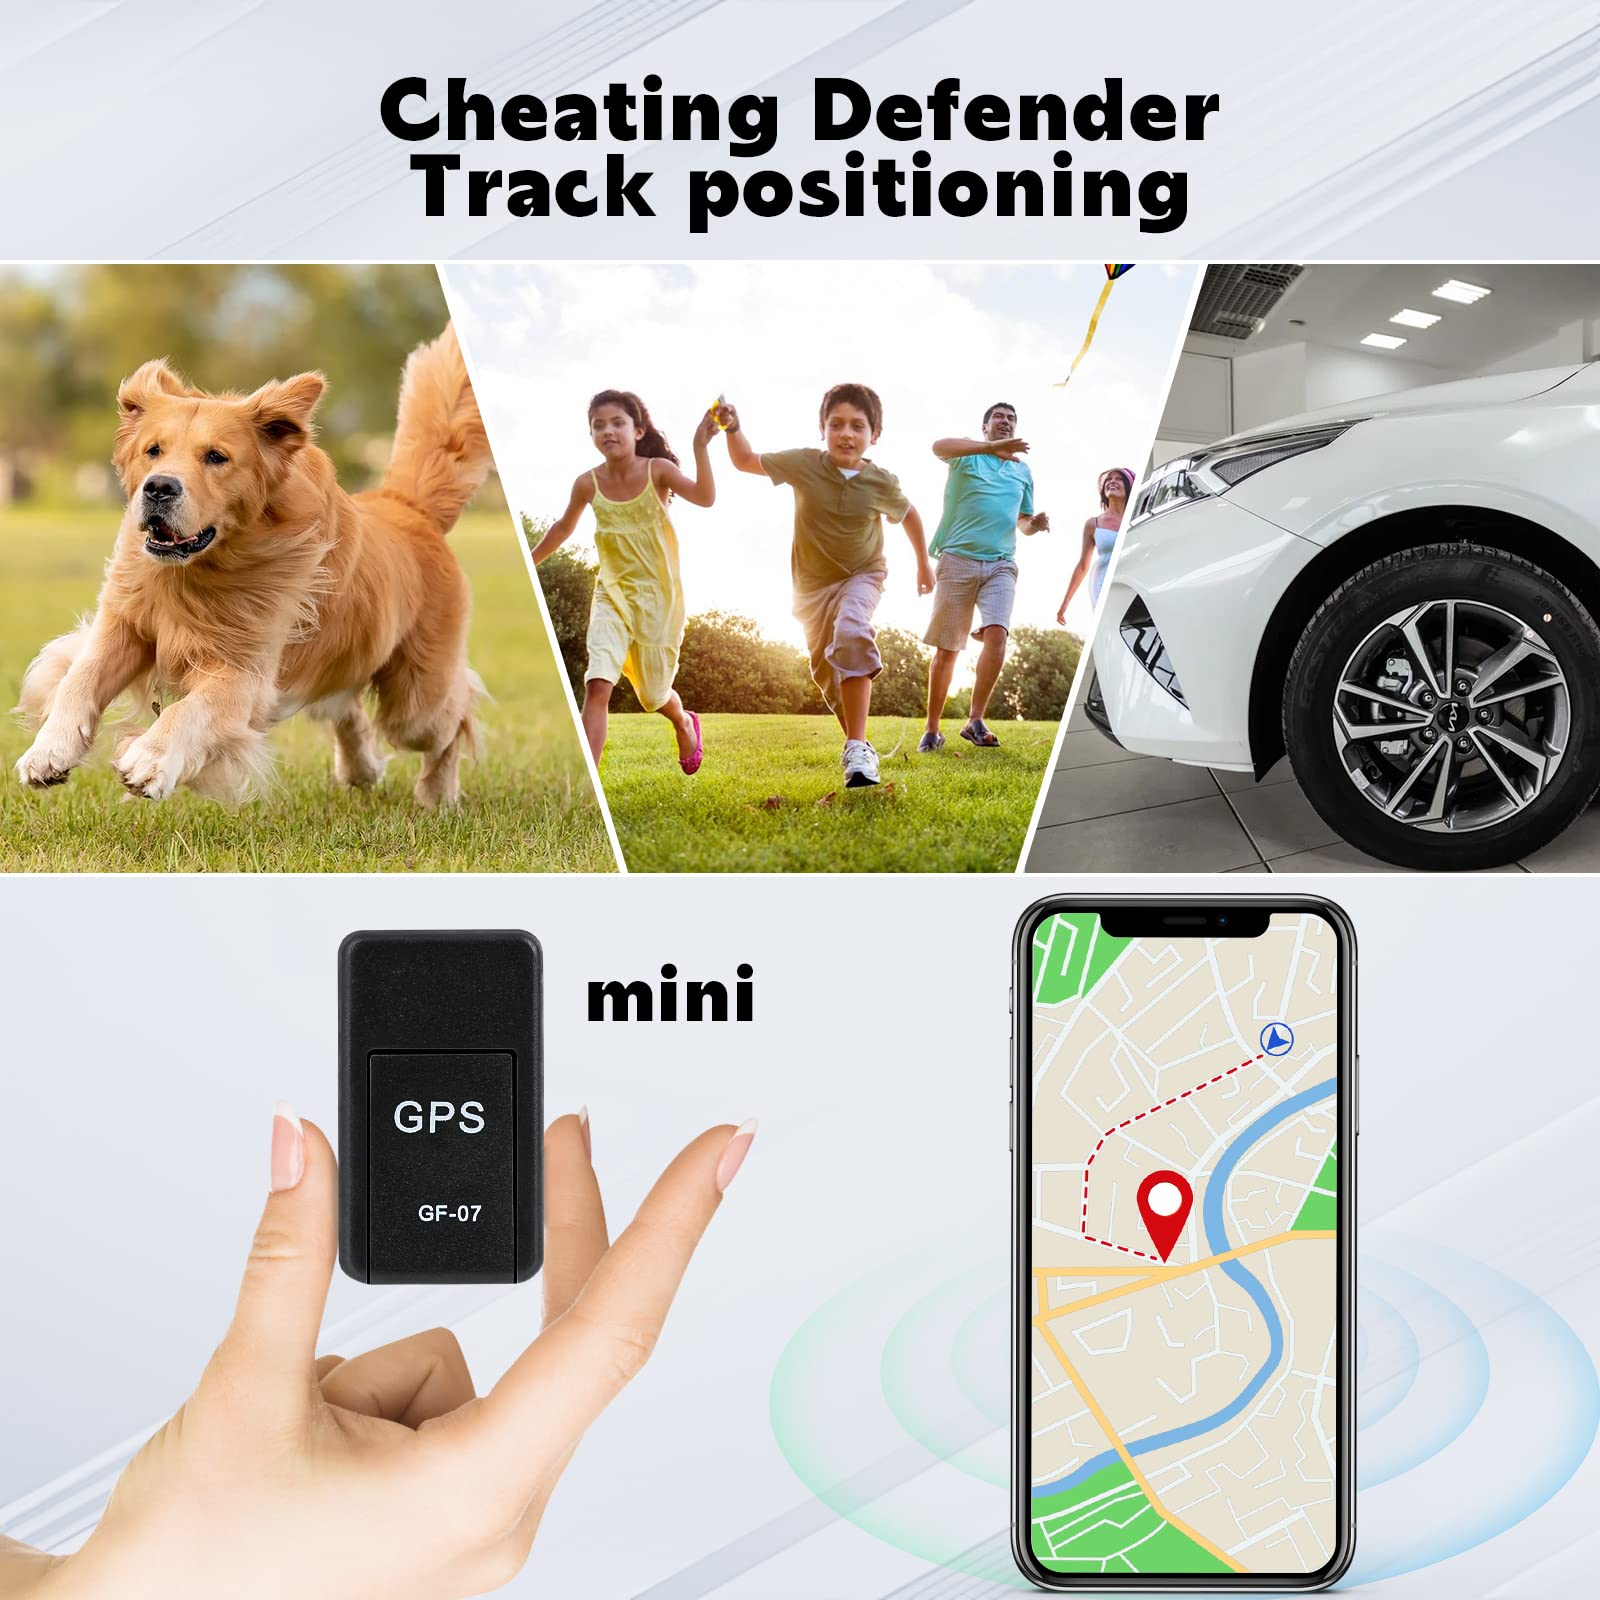 GPS Tracker for Vehicles - Magnetic Mini GPS Real time Car Locator Weatherproof Magnetic Case, Long Standby GSM SIM GPS Tracker for Vehicles Cars Trucks Loved Ones Asset Tracker